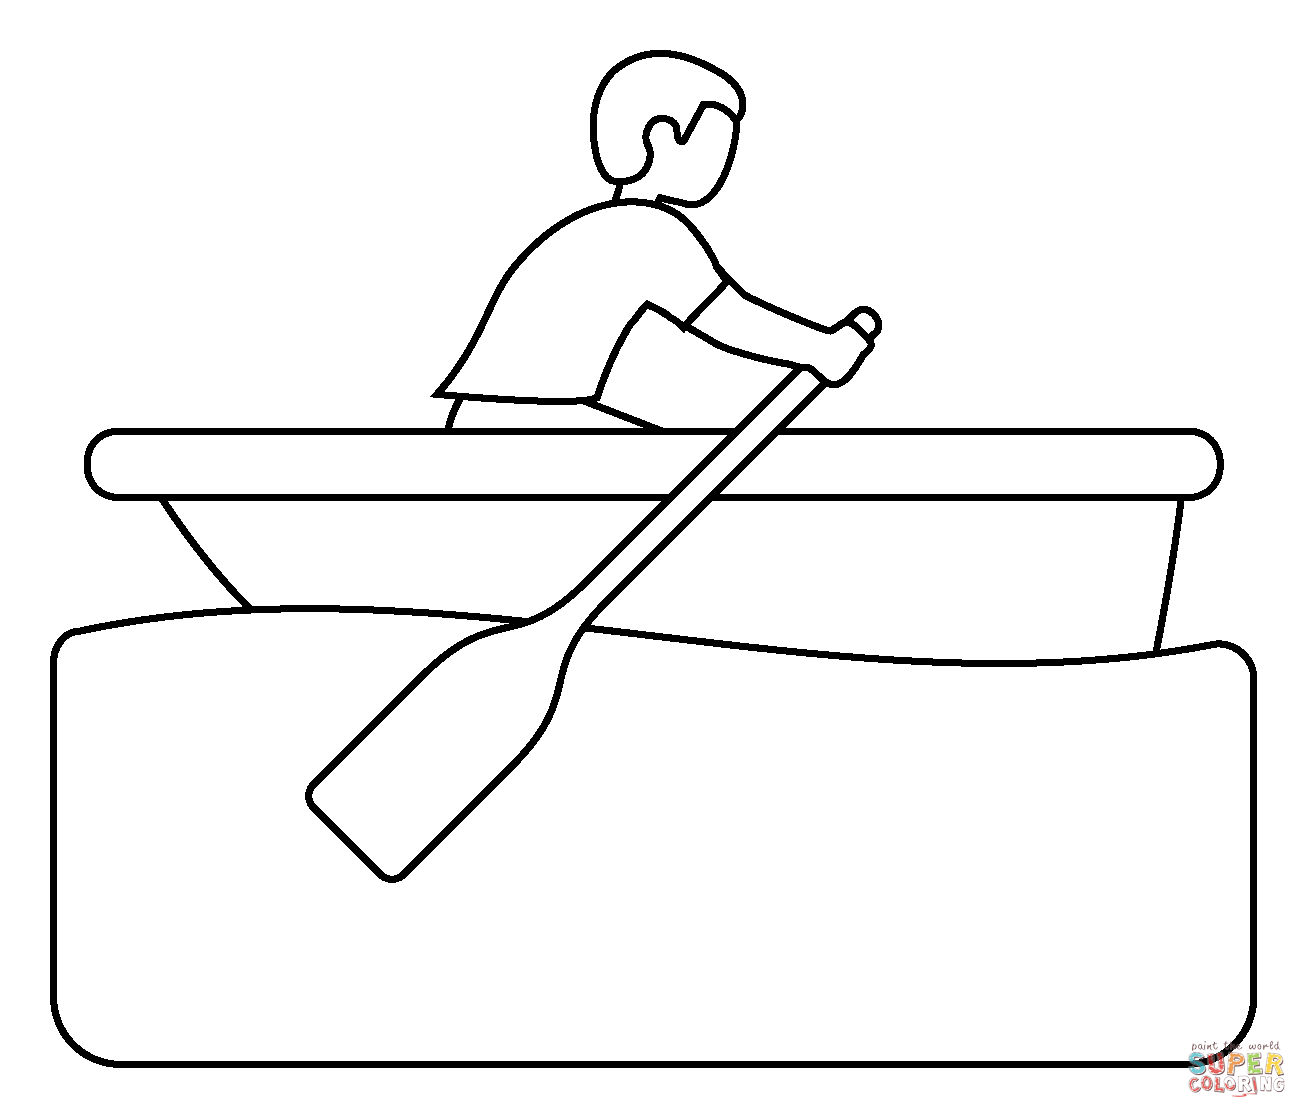 Man rowing boat emoji coloring page free printable coloring pages